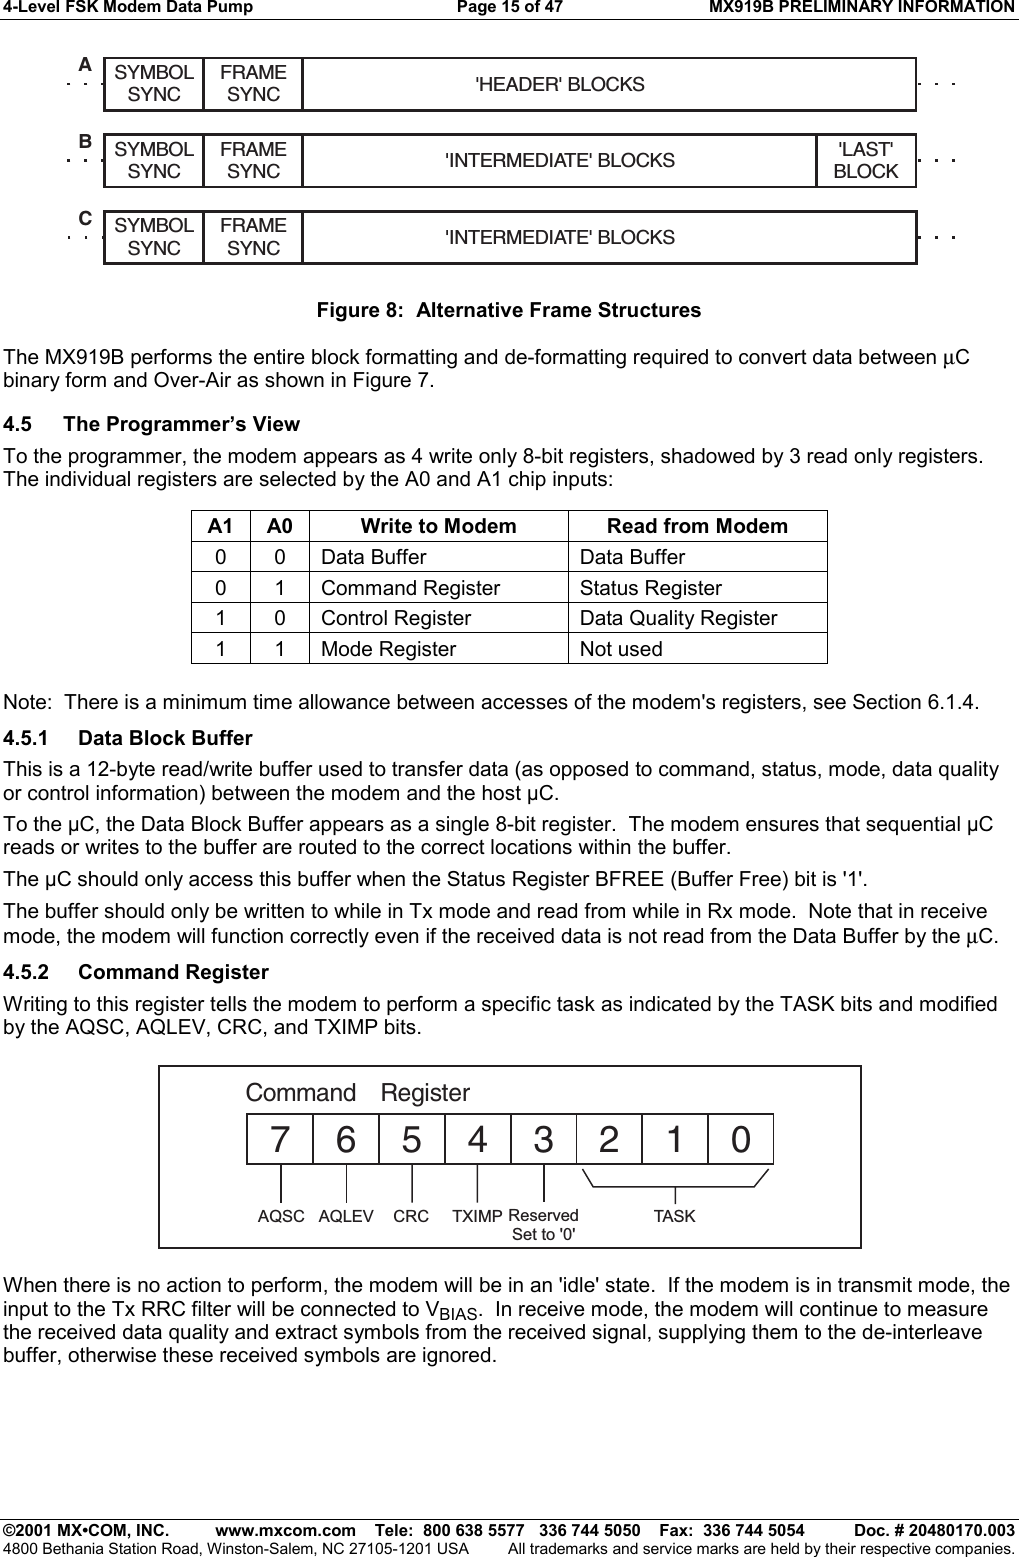 4-Level FSK Modem Data Pump  Page 15 of 47  MX919B PRELIMINARY INFORMATION   ©2001 MX•COM, INC.  www.mxcom.com    Tele:  800 638 5577   336 744 5050    Fax:  336 744 5054  Doc. # 20480170.003 4800 Bethania Station Road, Winston-Salem, NC 27105-1201 USA  All trademarks and service marks are held by their respective companies. SYMBOLSYNCSYMBOLSYNCSYMBOLSYNCFRAMESYNCFRAMESYNCFRAMESYNC&apos;LAST&apos;BLOCK&apos;HEADER&apos; BLOCKS&apos;INTERMEDIATE&apos; BLOCKS&apos;INTERMEDIATE&apos; BLOCKSABC Figure 8:  Alternative Frame Structures The MX919B performs the entire block formatting and de-formatting required to convert data between µC binary form and Over-Air as shown in Figure 7. 4.5  The Programmer’s View To the programmer, the modem appears as 4 write only 8-bit registers, shadowed by 3 read only registers.  The individual registers are selected by the A0 and A1 chip inputs:  A1  A0  Write to Modem  Read from Modem 0  0  Data Buffer  Data Buffer 0  1  Command Register  Status Register 1  0  Control Register  Data Quality Register 1  1  Mode Register  Not used  Note:  There is a minimum time allowance between accesses of the modem&apos;s registers, see Section 6.1.4. 4.5.1  Data Block Buffer This is a 12-byte read/write buffer used to transfer data (as opposed to command, status, mode, data quality or control information) between the modem and the host µC.  To the µC, the Data Block Buffer appears as a single 8-bit register.  The modem ensures that sequential µC reads or writes to the buffer are routed to the correct locations within the buffer. The µC should only access this buffer when the Status Register BFREE (Buffer Free) bit is &apos;1&apos;. The buffer should only be written to while in Tx mode and read from while in Rx mode.  Note that in receive mode, the modem will function correctly even if the received data is not read from the Data Buffer by the µC. 4.5.2 Command Register Writing to this register tells the modem to perform a specific task as indicated by the TASK bits and modified by the AQSC, AQLEV, CRC, and TXIMP bits. 76543210Command RegisterAQSC TXIMP ReservedSet to &apos;0&apos;TASKAQLEV CRC When there is no action to perform, the modem will be in an &apos;idle&apos; state.  If the modem is in transmit mode, the input to the Tx RRC filter will be connected to VBIAS.  In receive mode, the modem will continue to measure the received data quality and extract symbols from the received signal, supplying them to the de-interleave buffer, otherwise these received symbols are ignored. 